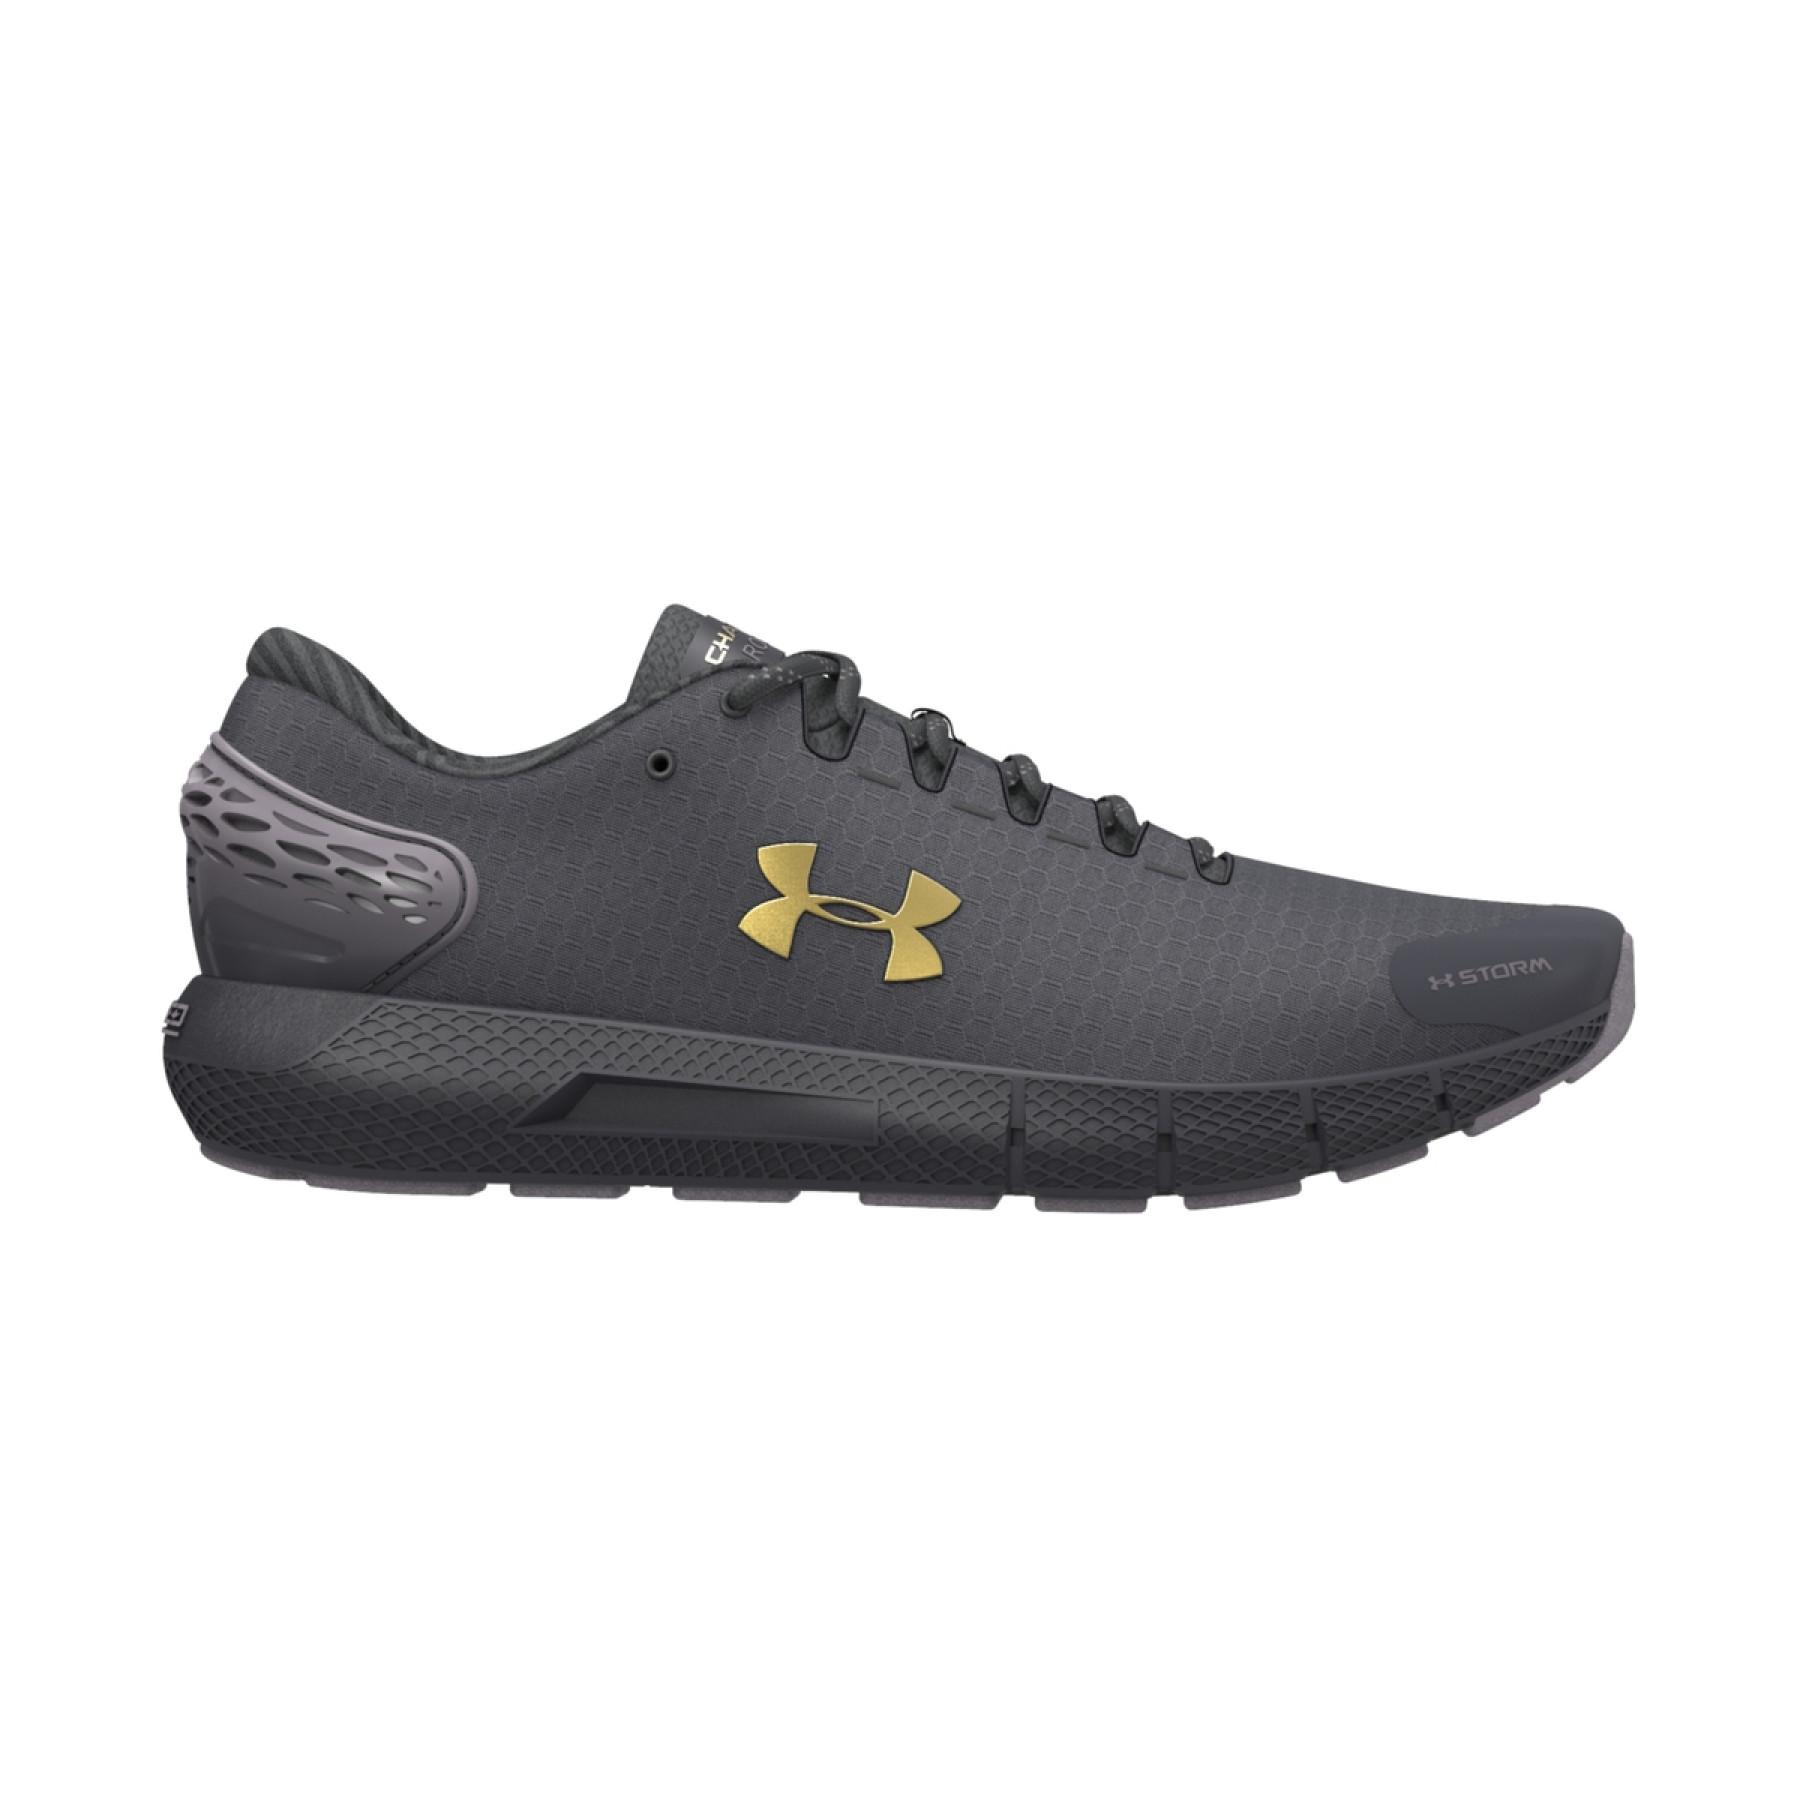 Zapatillas para correr Under Armour Charged Rogue 2 ColdGear Infrared